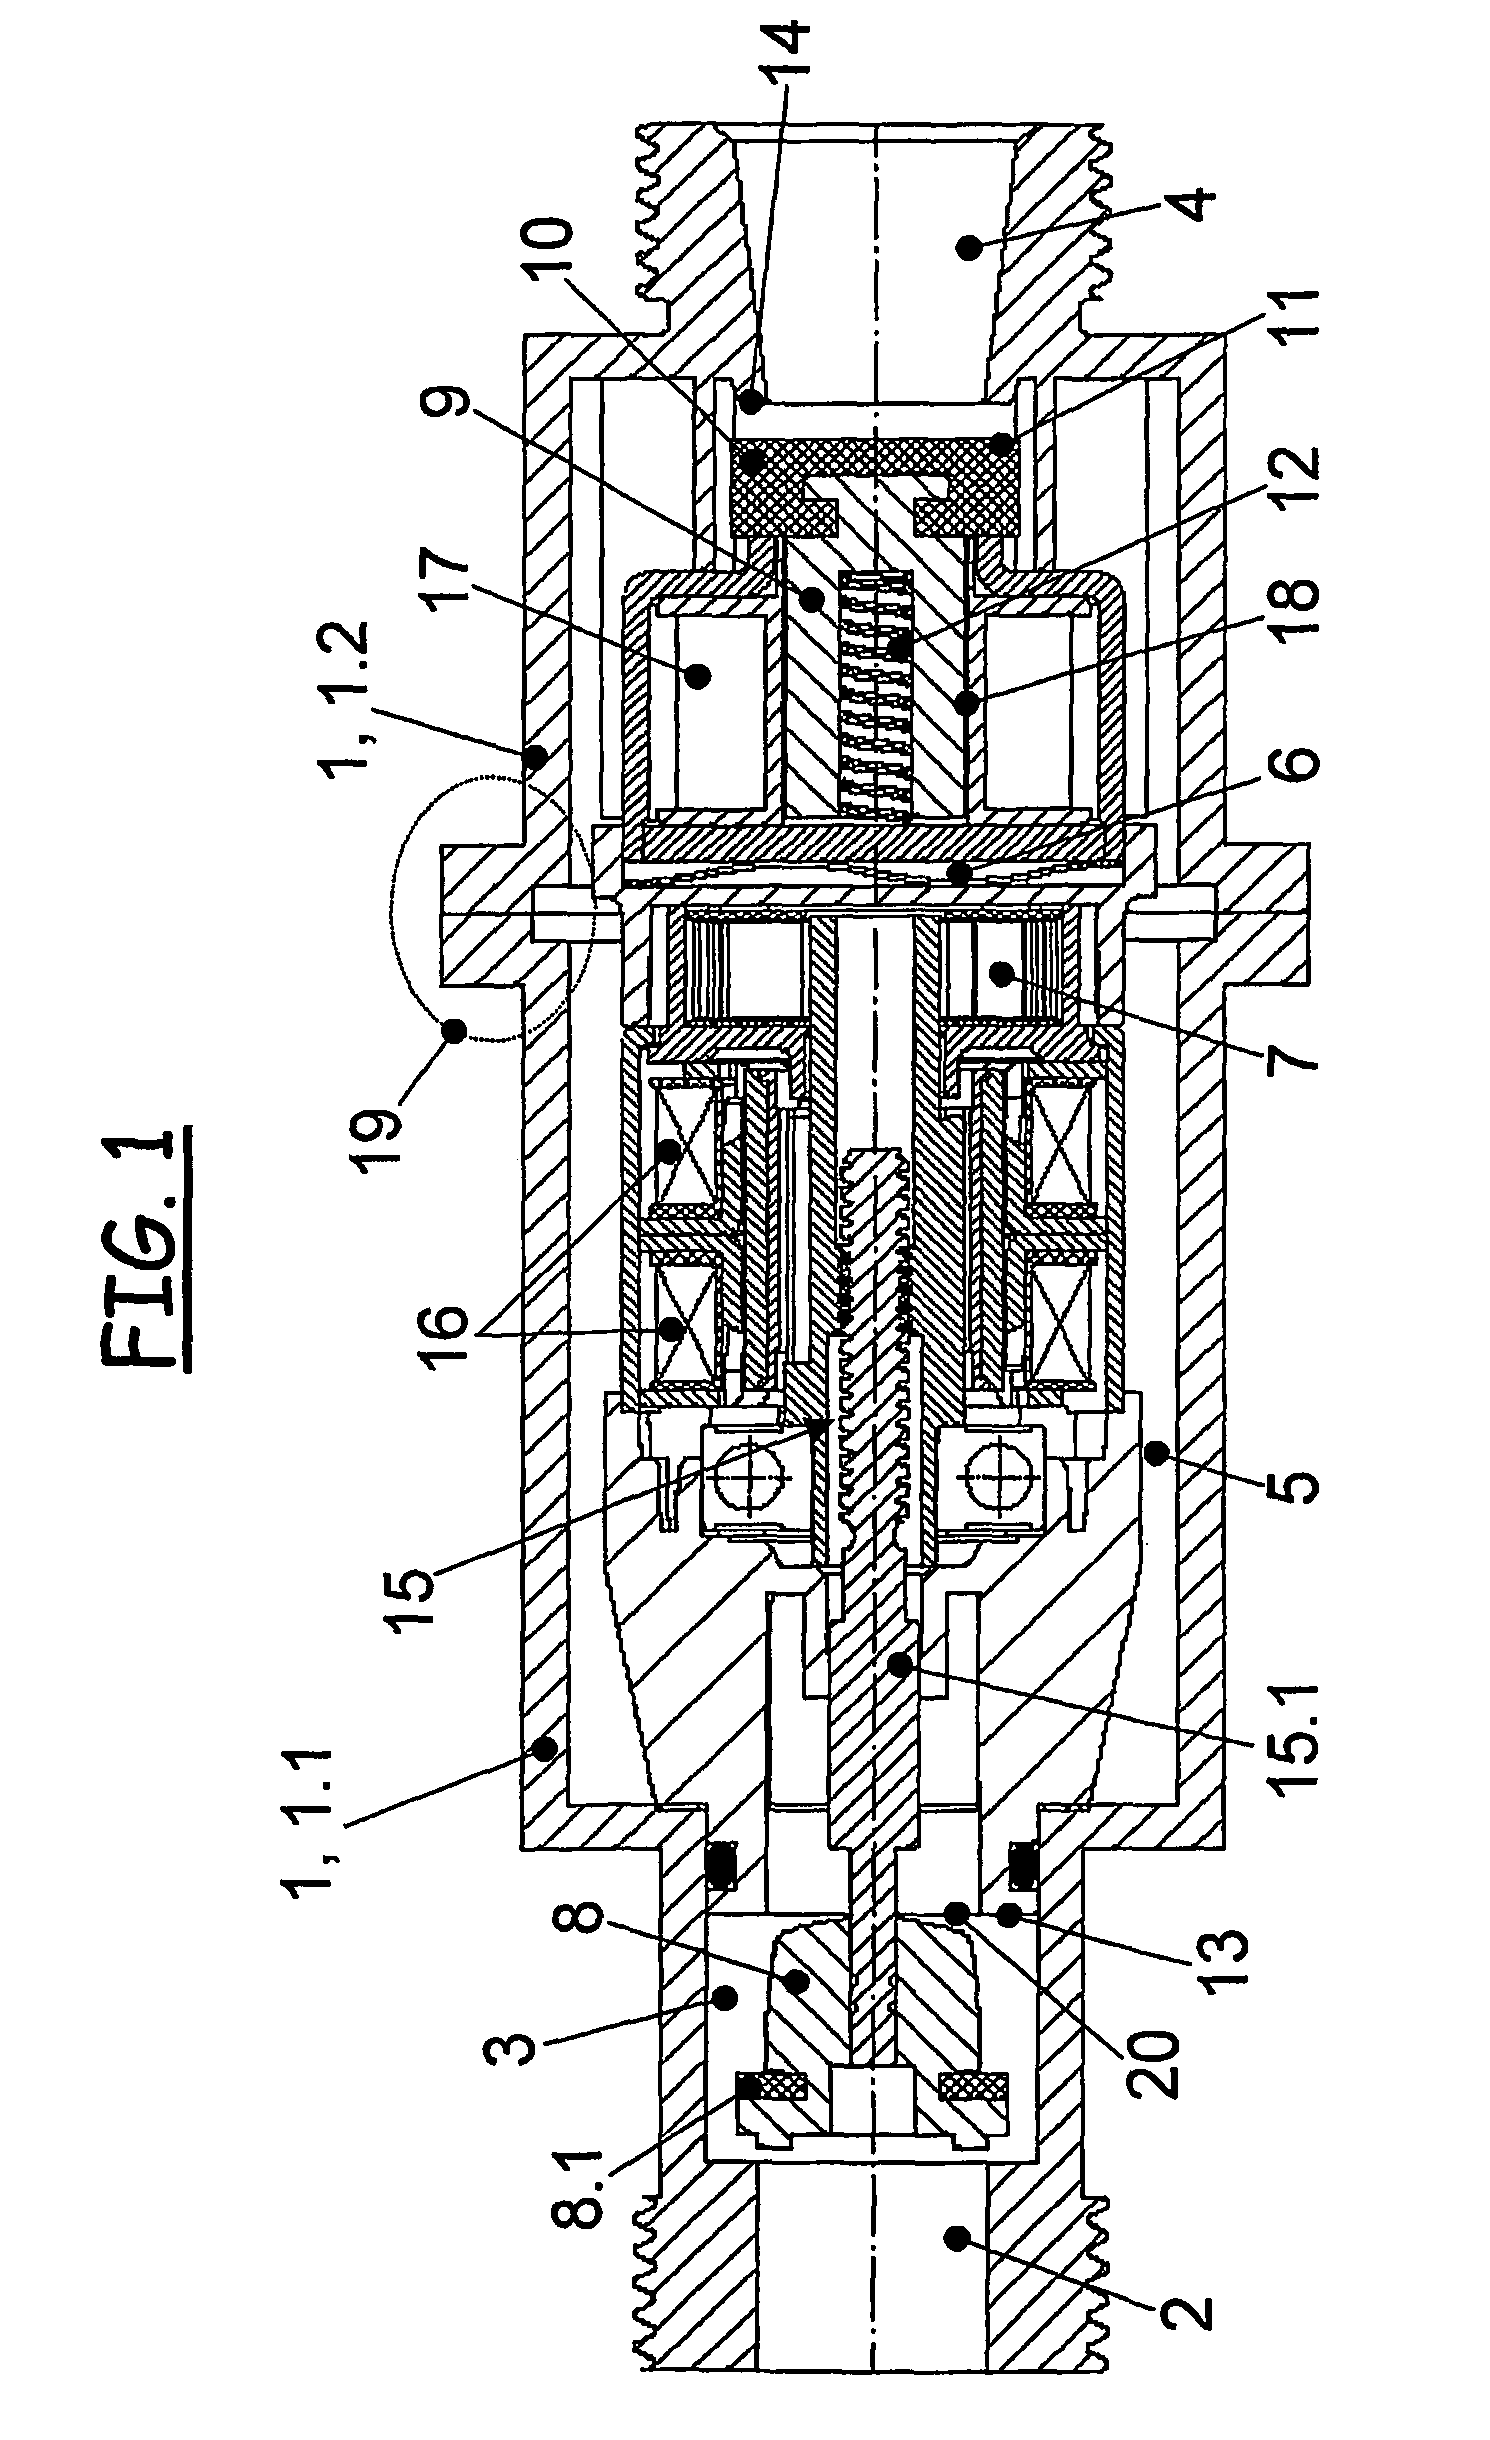 Gas regulating and safety valve for burners of a modulatable gas heating device